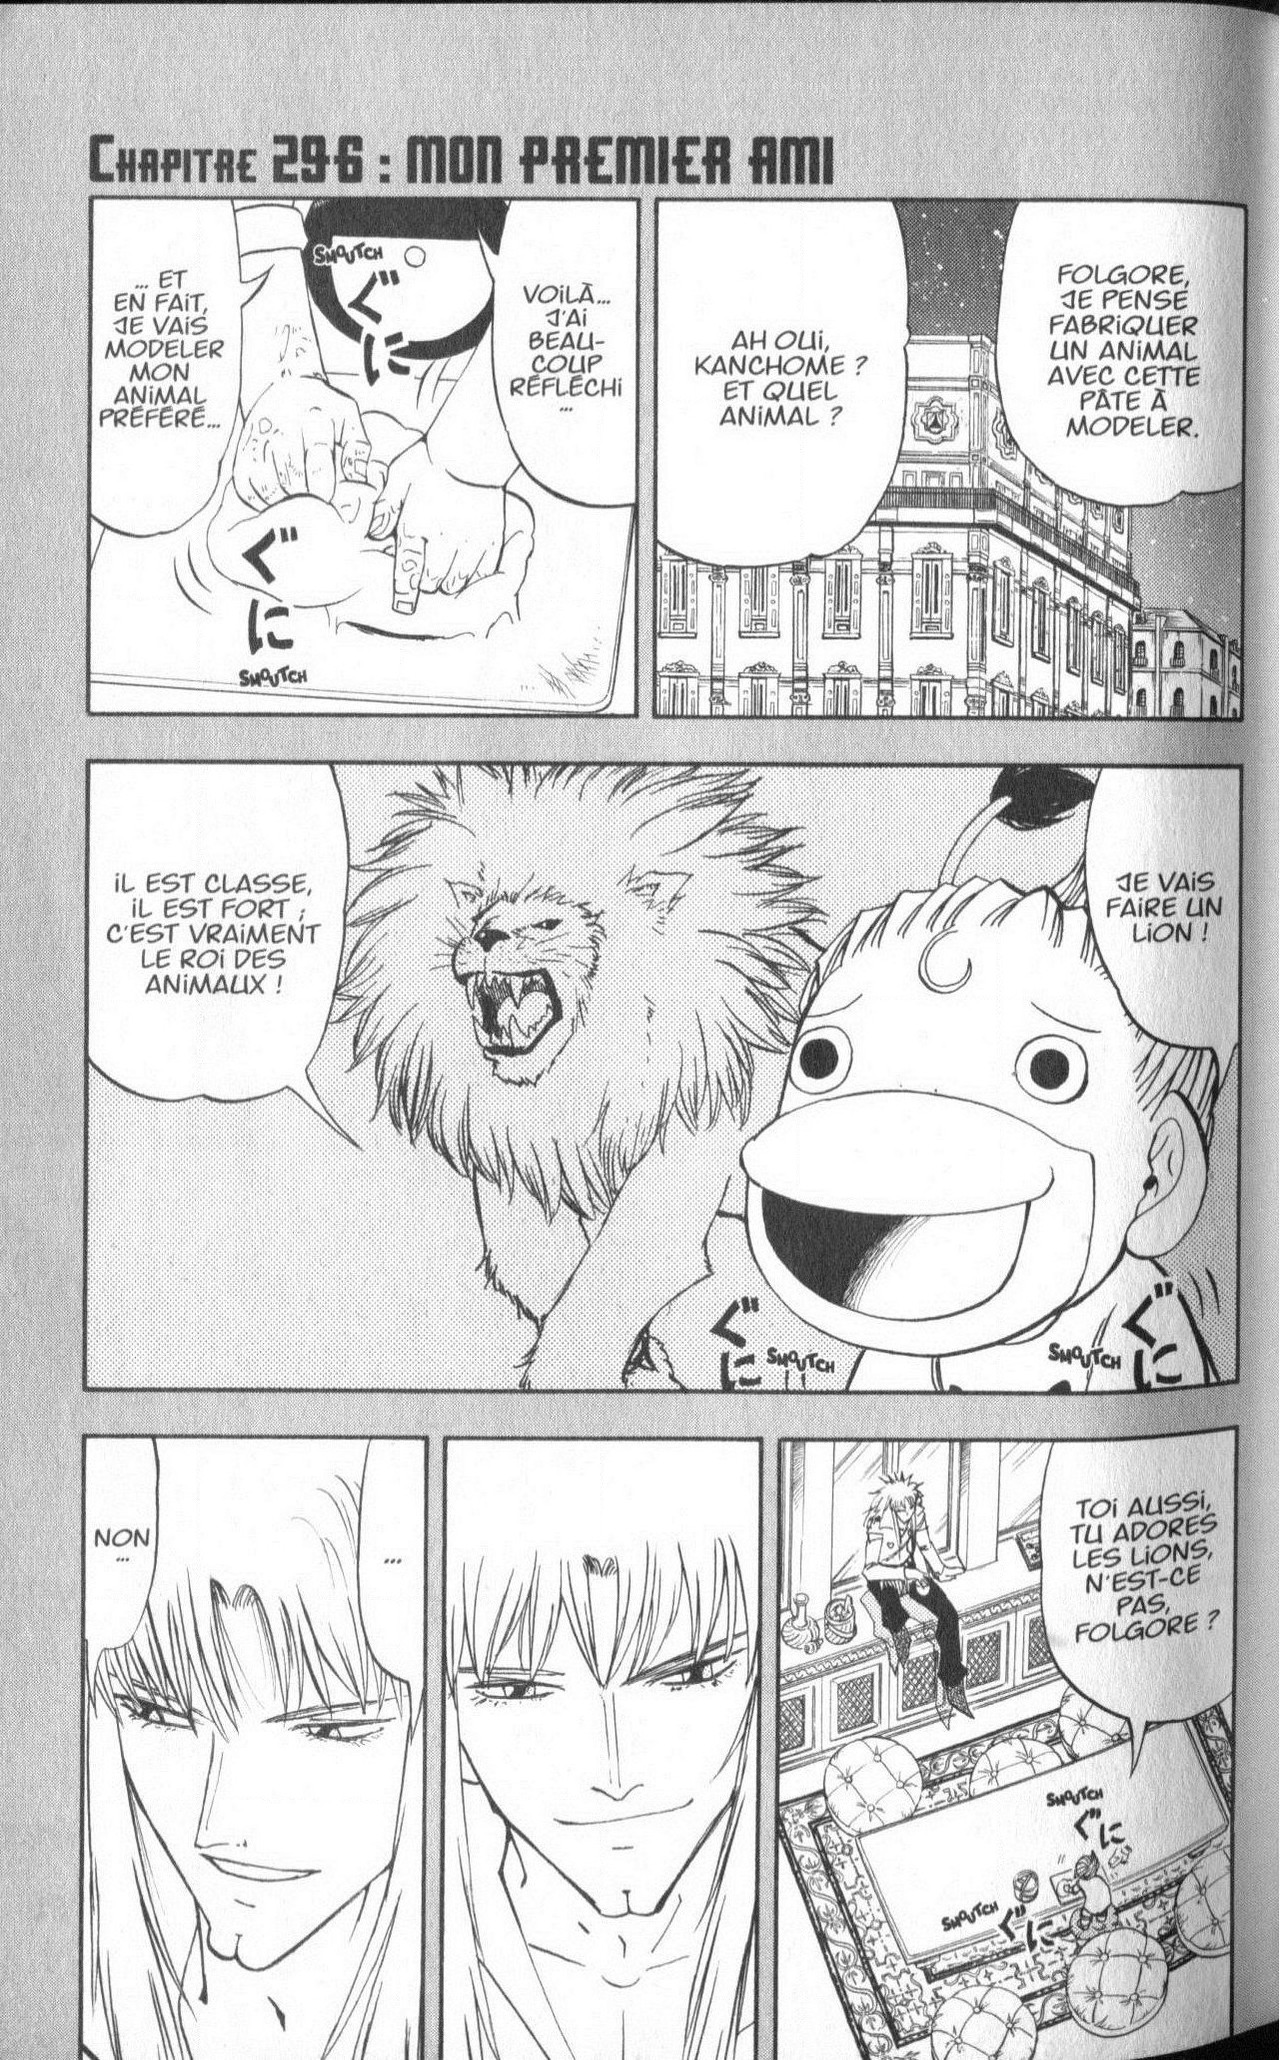 Zatch Bell: Chapter 296 - Page 1